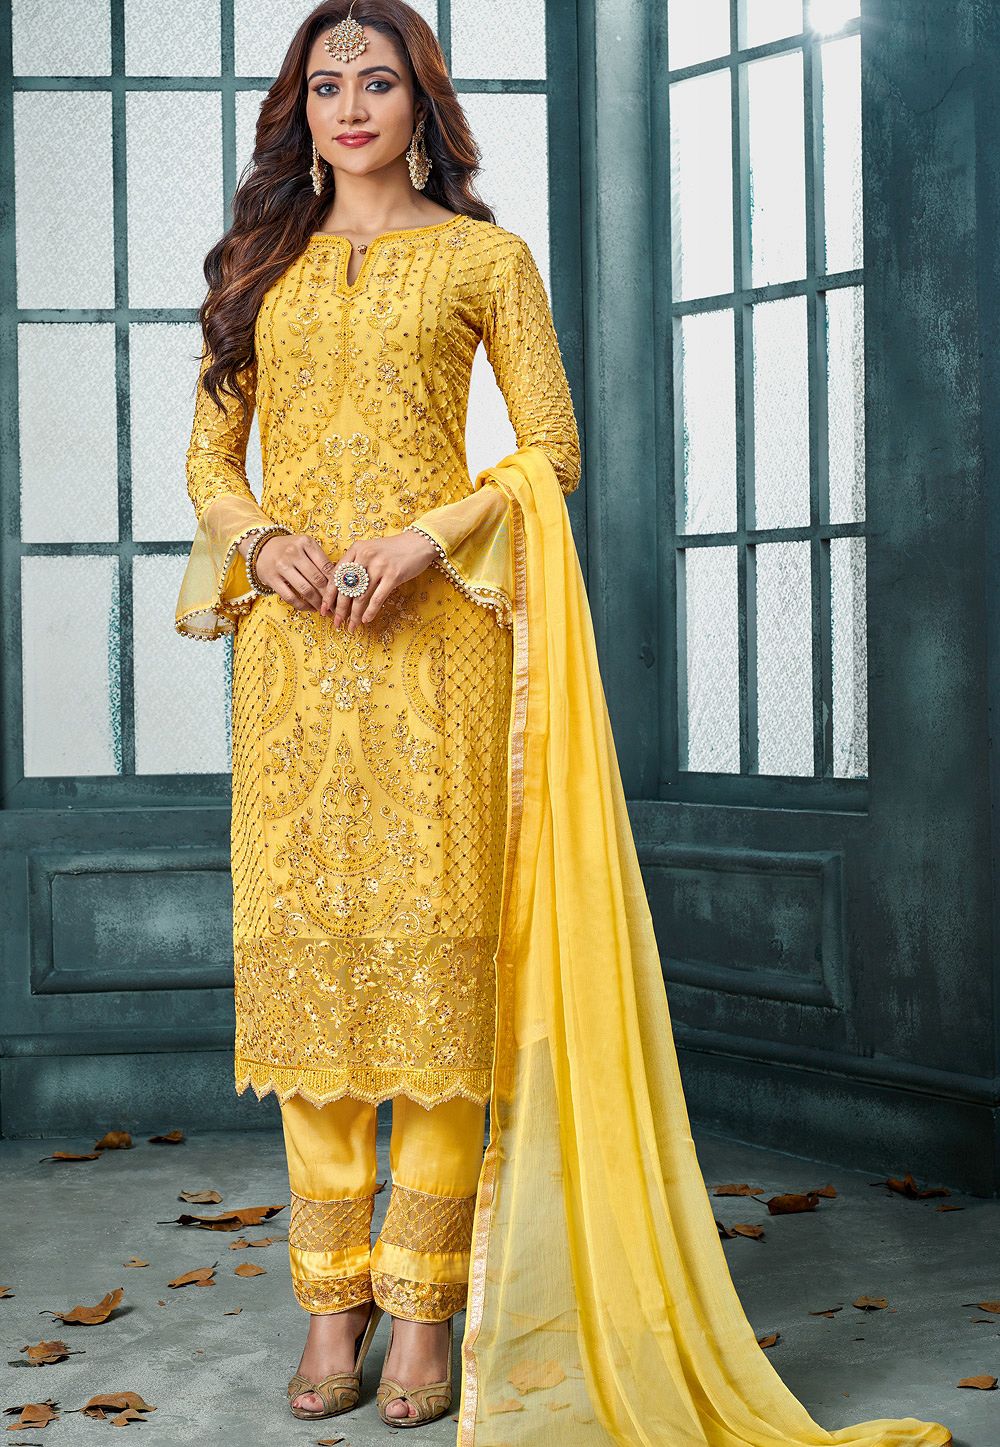 https://www.kollybollyethnics.com/image/catalog/data/01May2019/yellow-georgette-embroidered-straight-trouser-suit-802.jpg